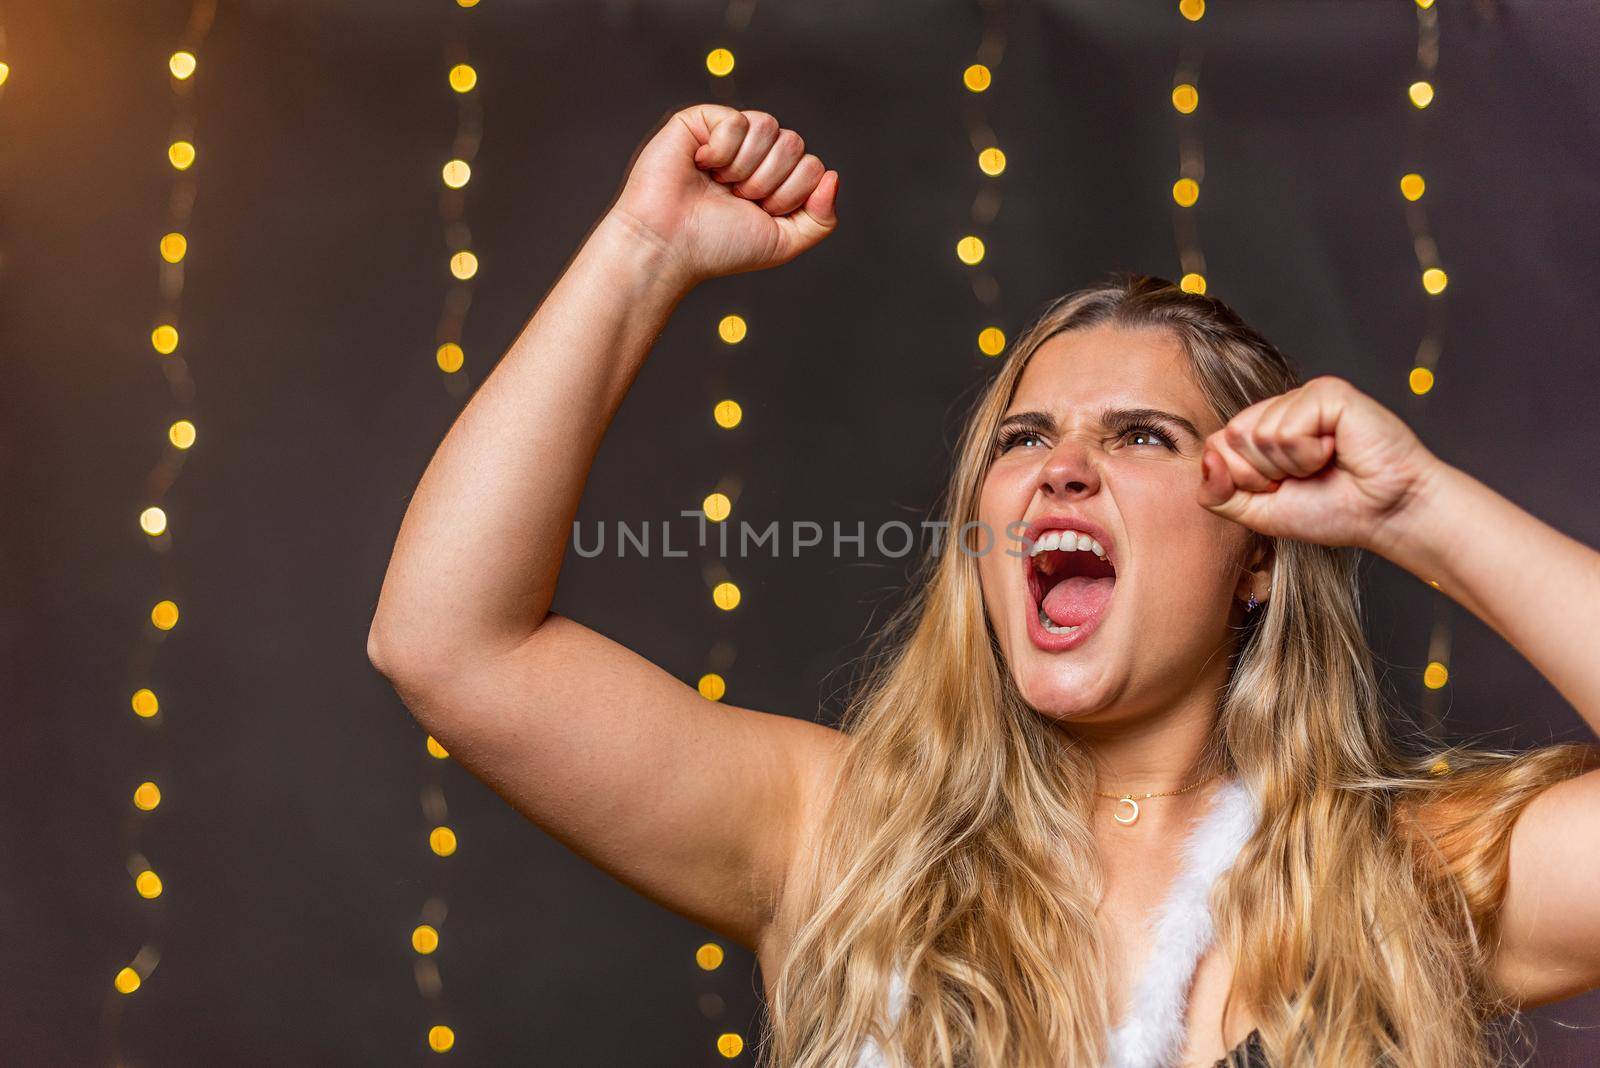 A euphoric Caucasian woman screaming and raising her hands with clenched fists against a background of blurred lights.